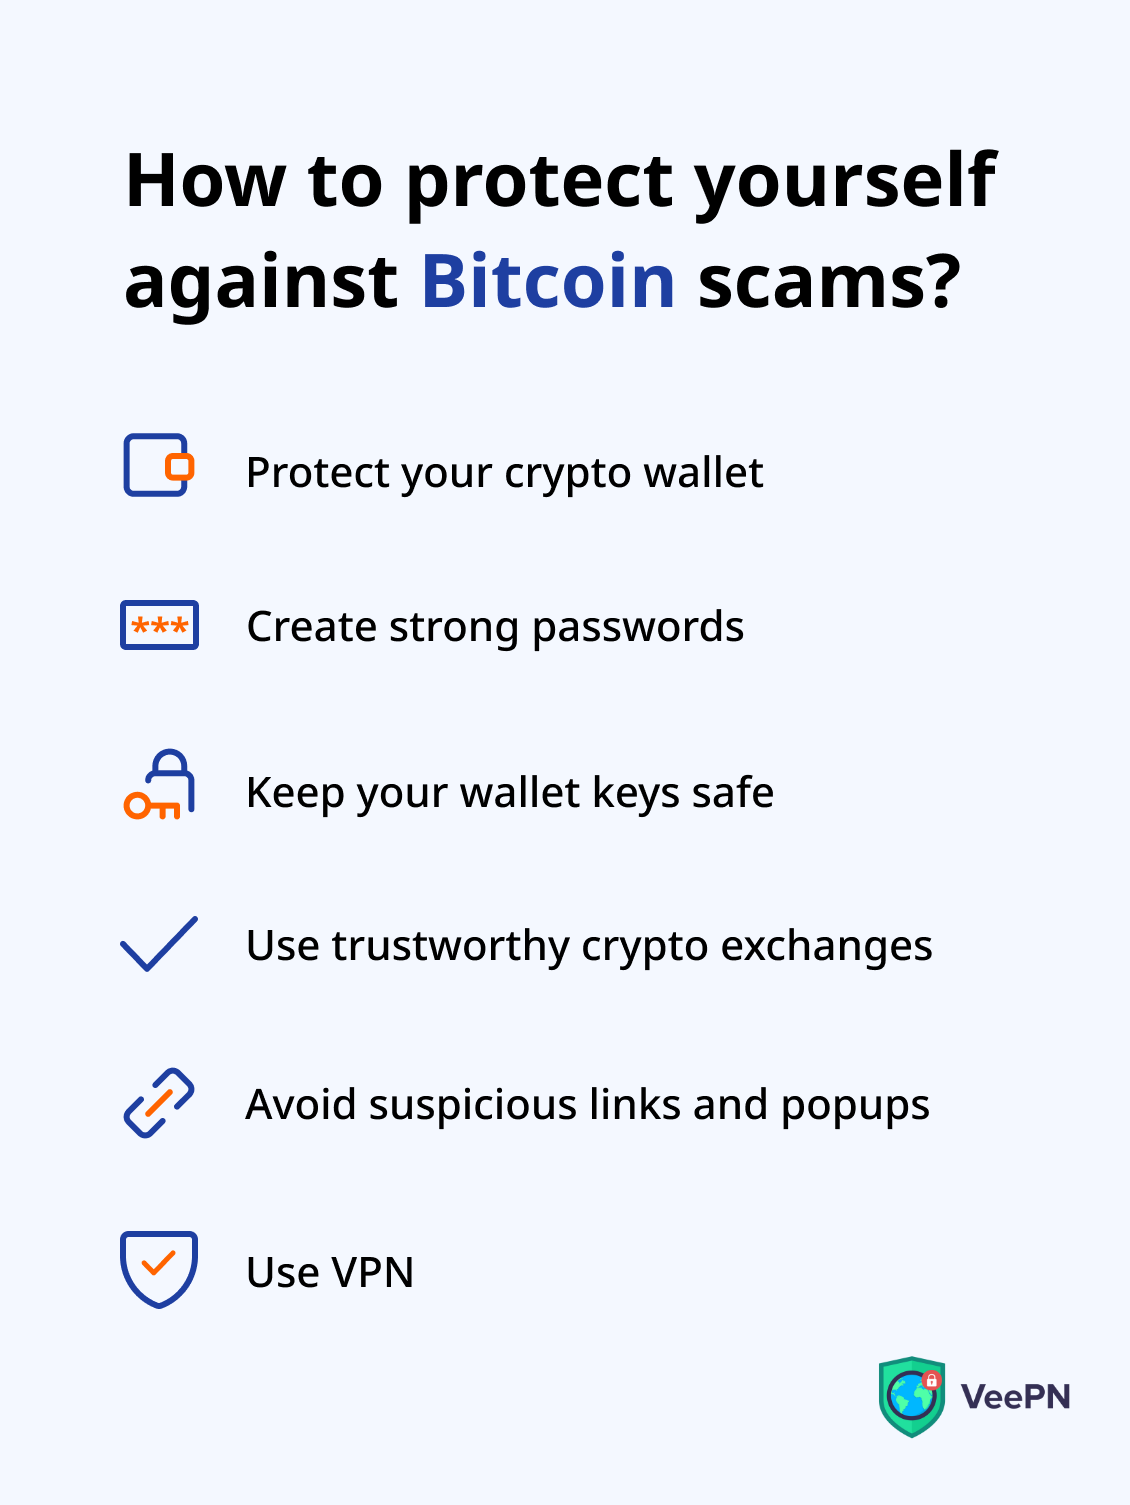 How to protect yourself against Bitcoin scams?